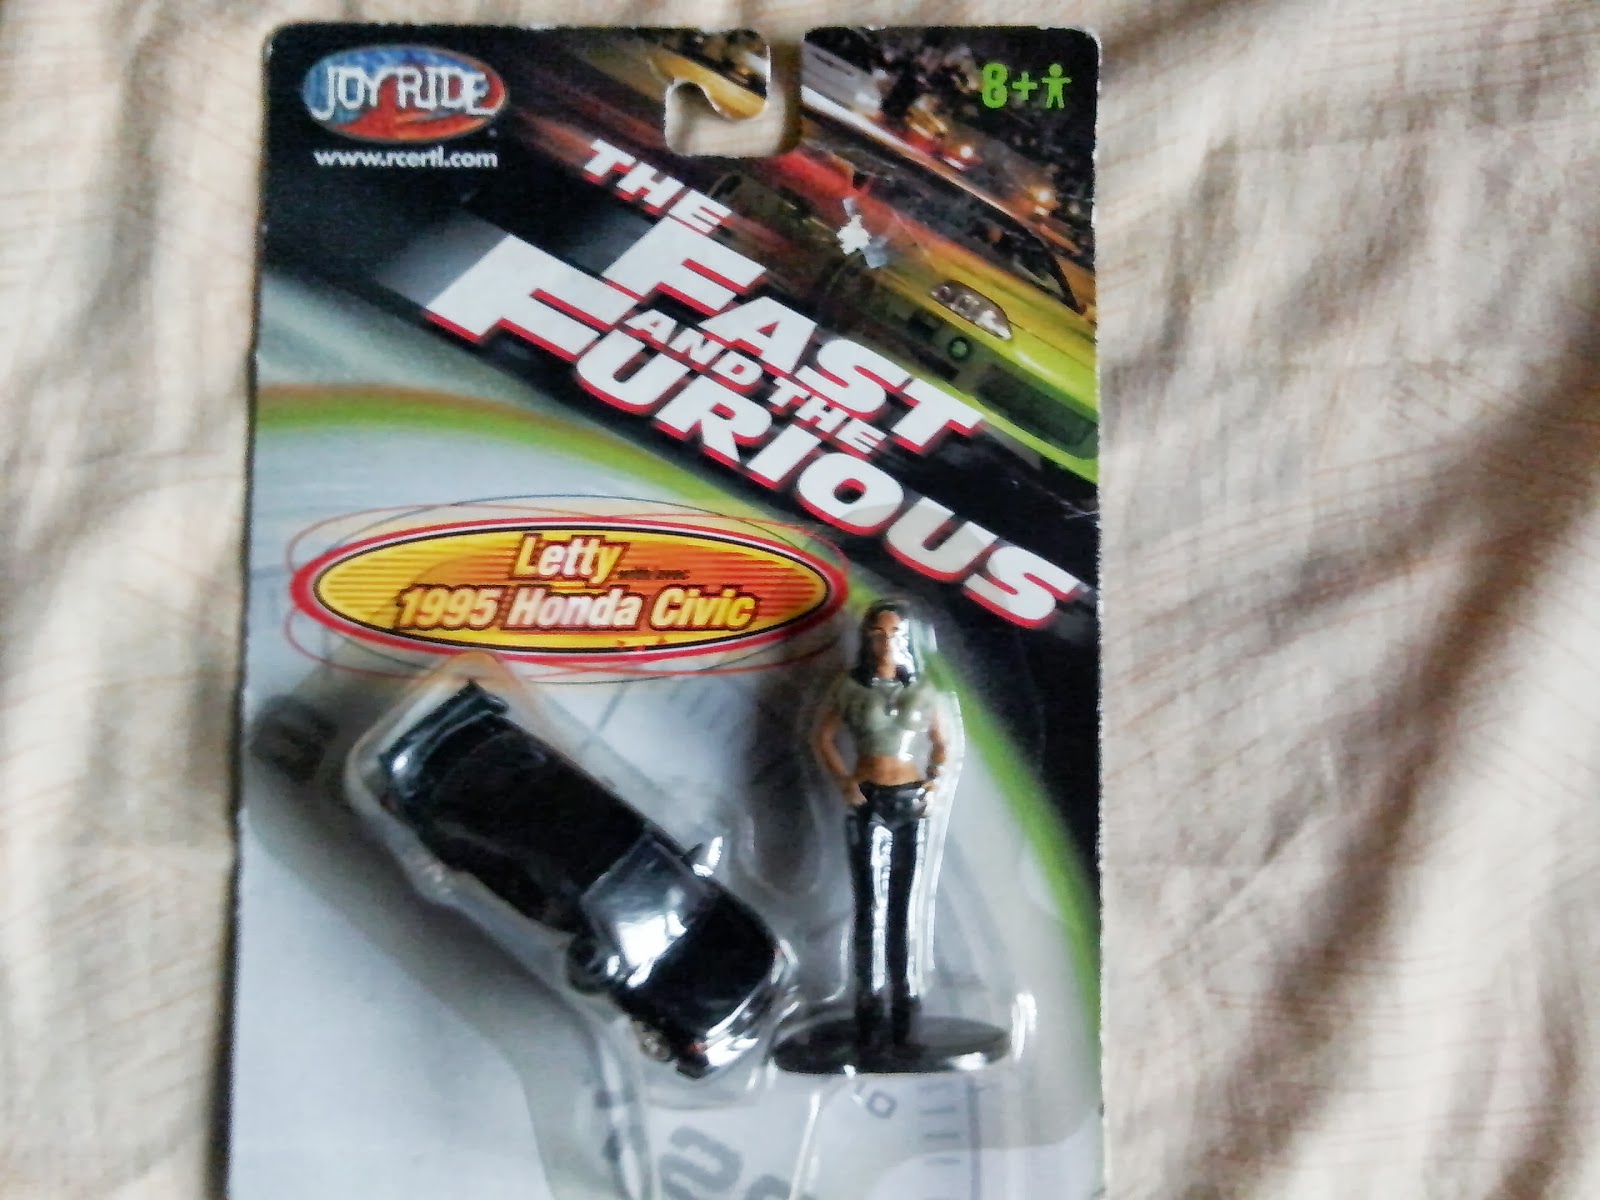 2 Fast 2 Furious Toy Cars